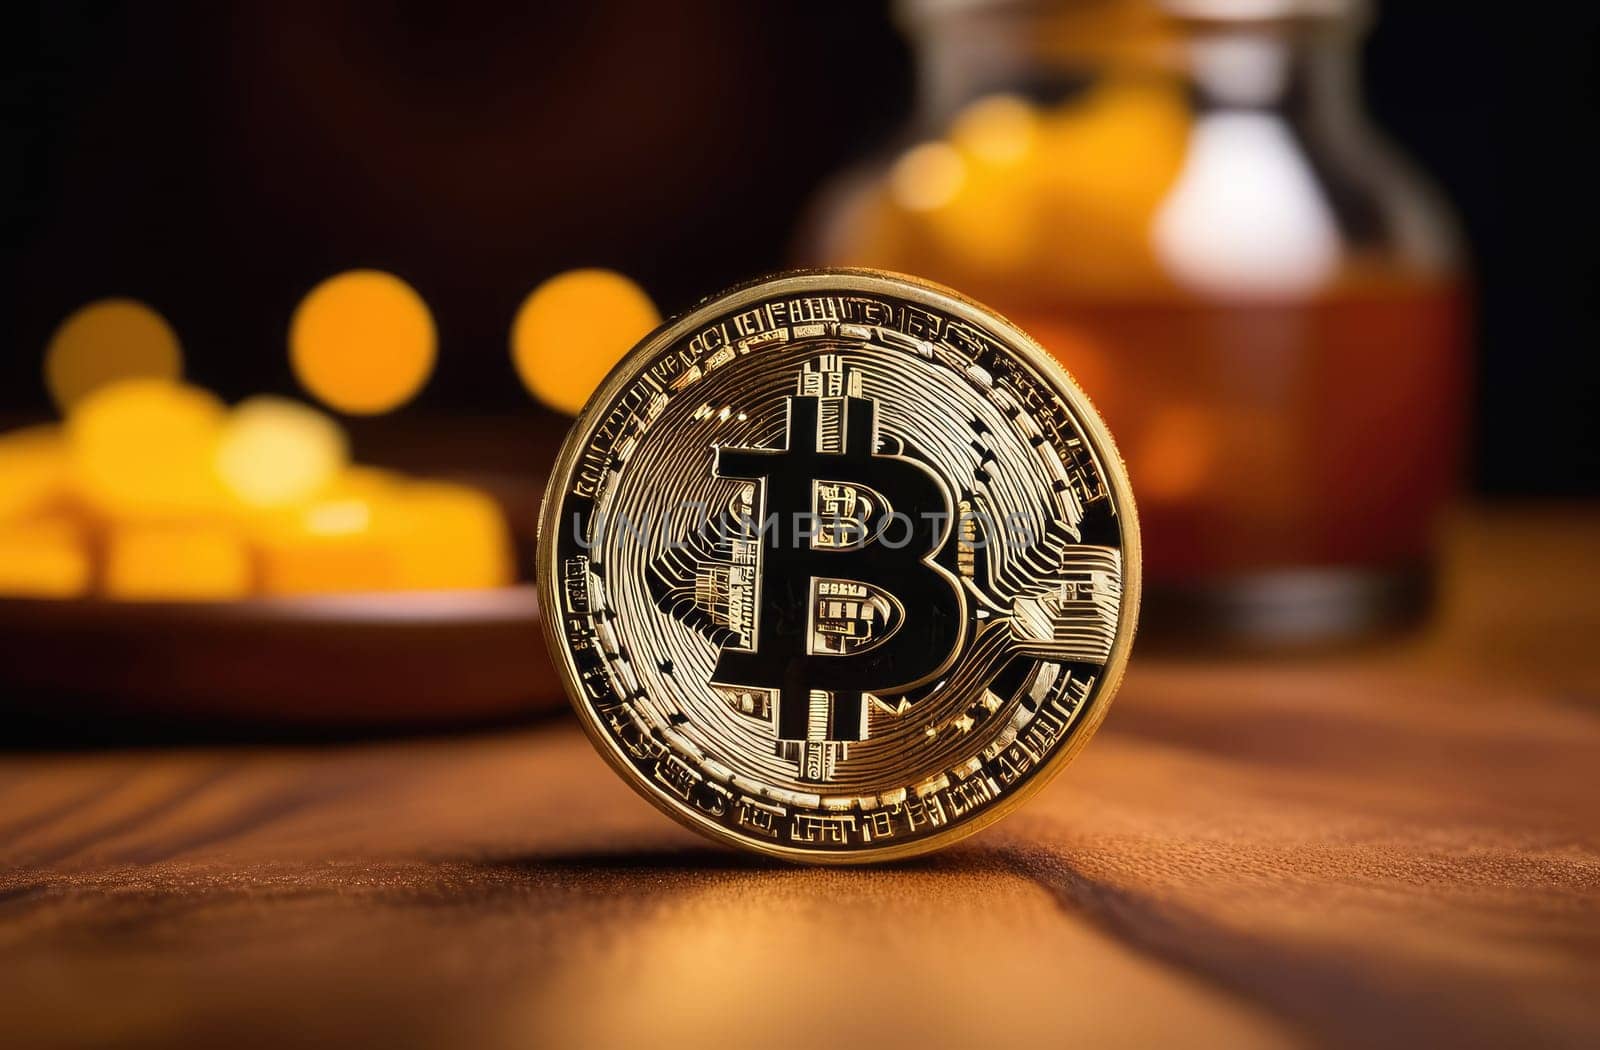 Golden shiny bitcoin coins close-up on a wooden table. Dark background. Payment system concept. Bokeh.